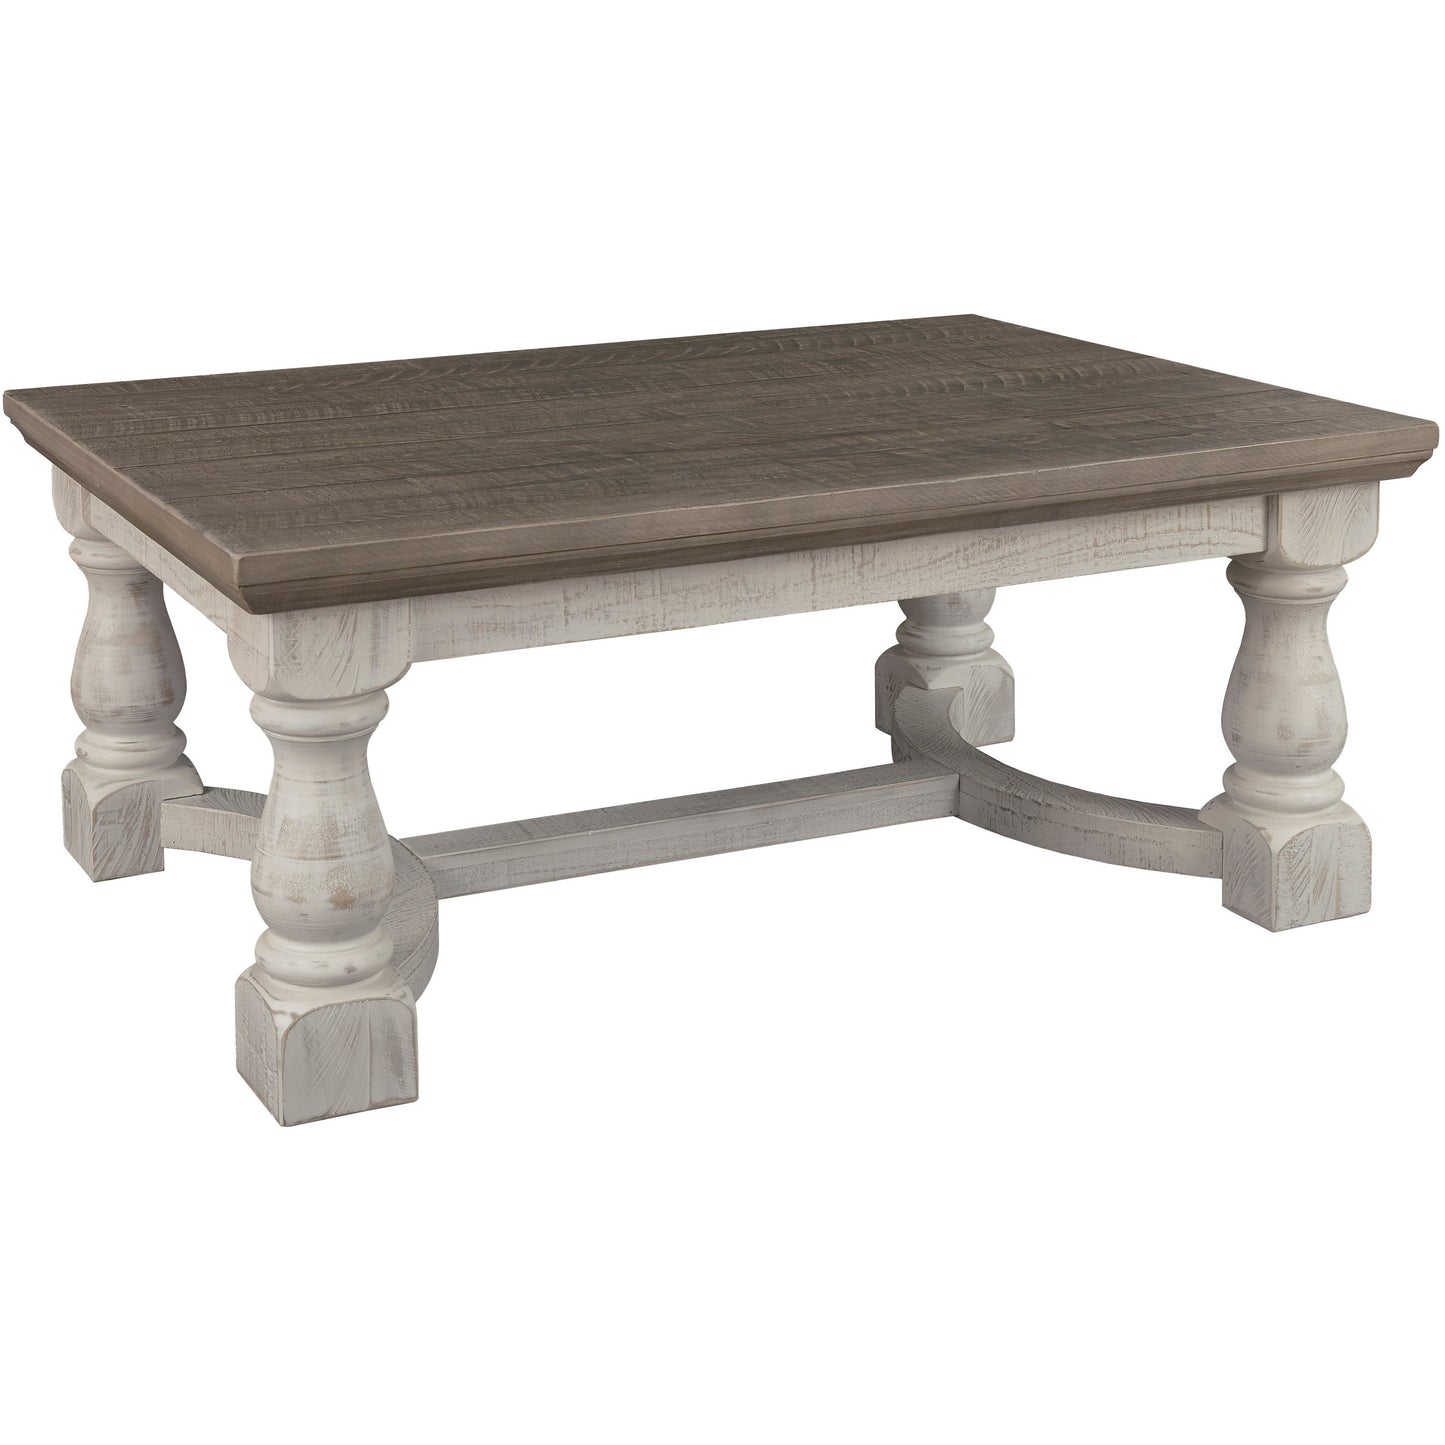 HAVALANCE COFFEE TABLE - GRAY/WHITE